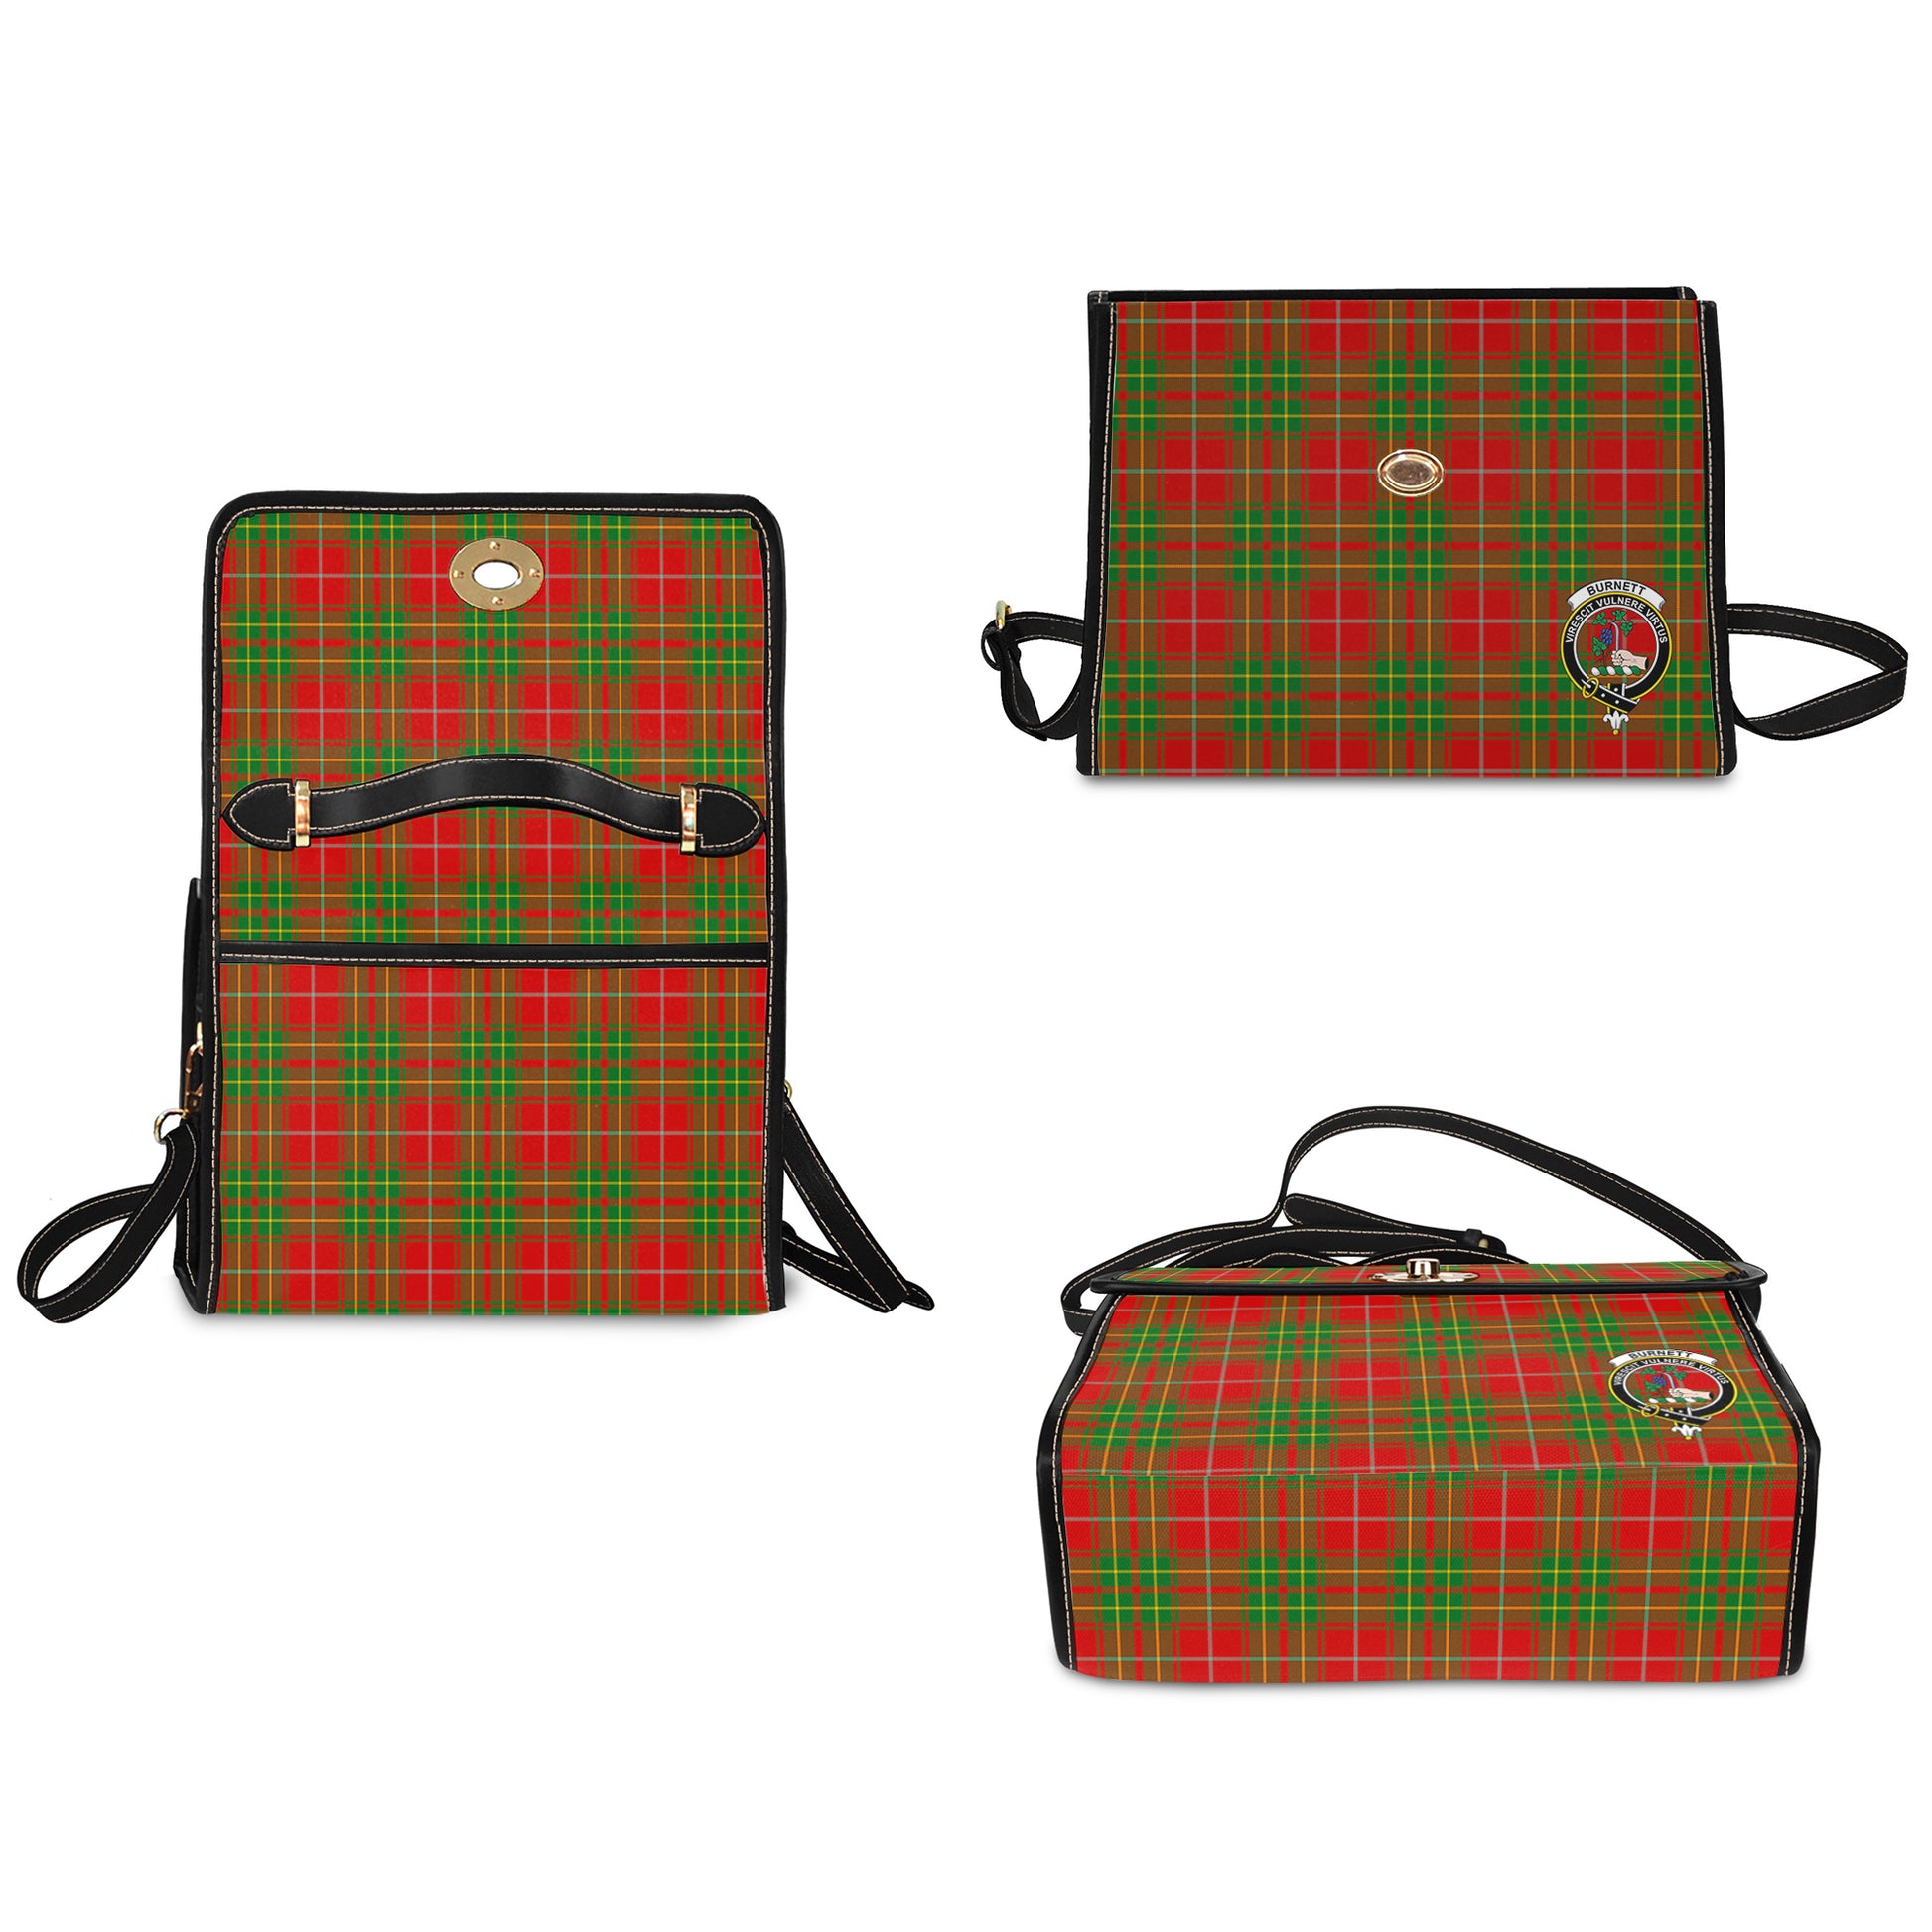 Burnett Ancient Tartan Leather Strap Waterproof Canvas Bag with Family Crest